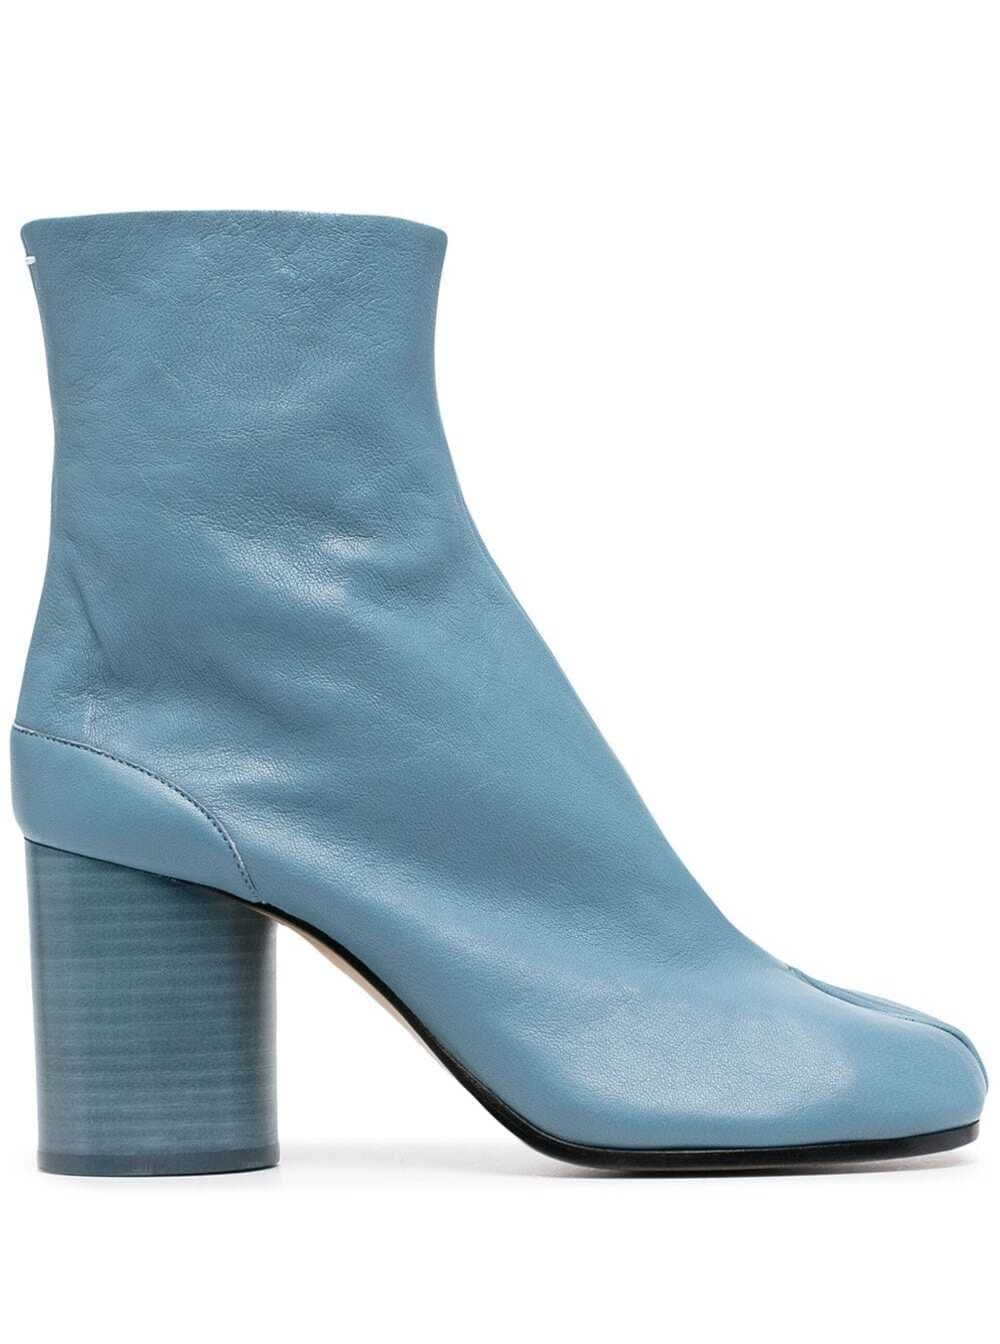 Buy Maison Margiela Tabi Ankle Boots In Light Blue Leather online, shop Maison Margiela shoes with free shipping